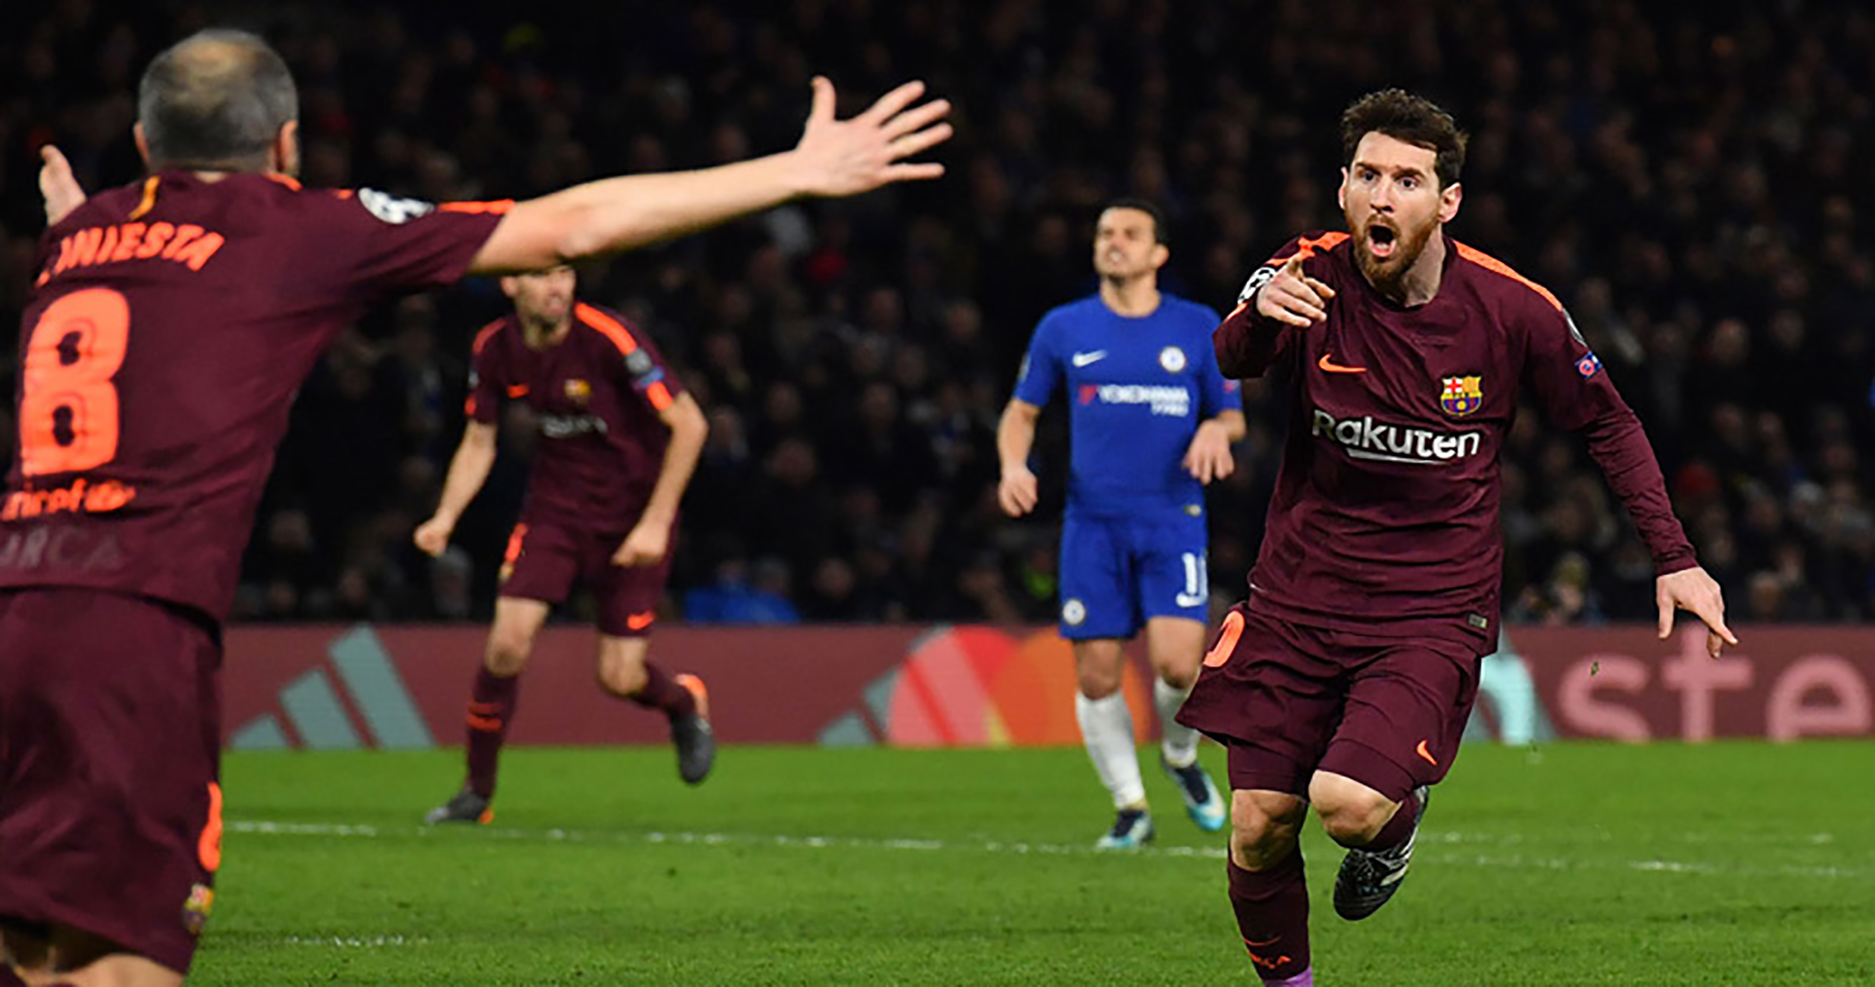 Messi ends Chelsea drought to give Barca edge